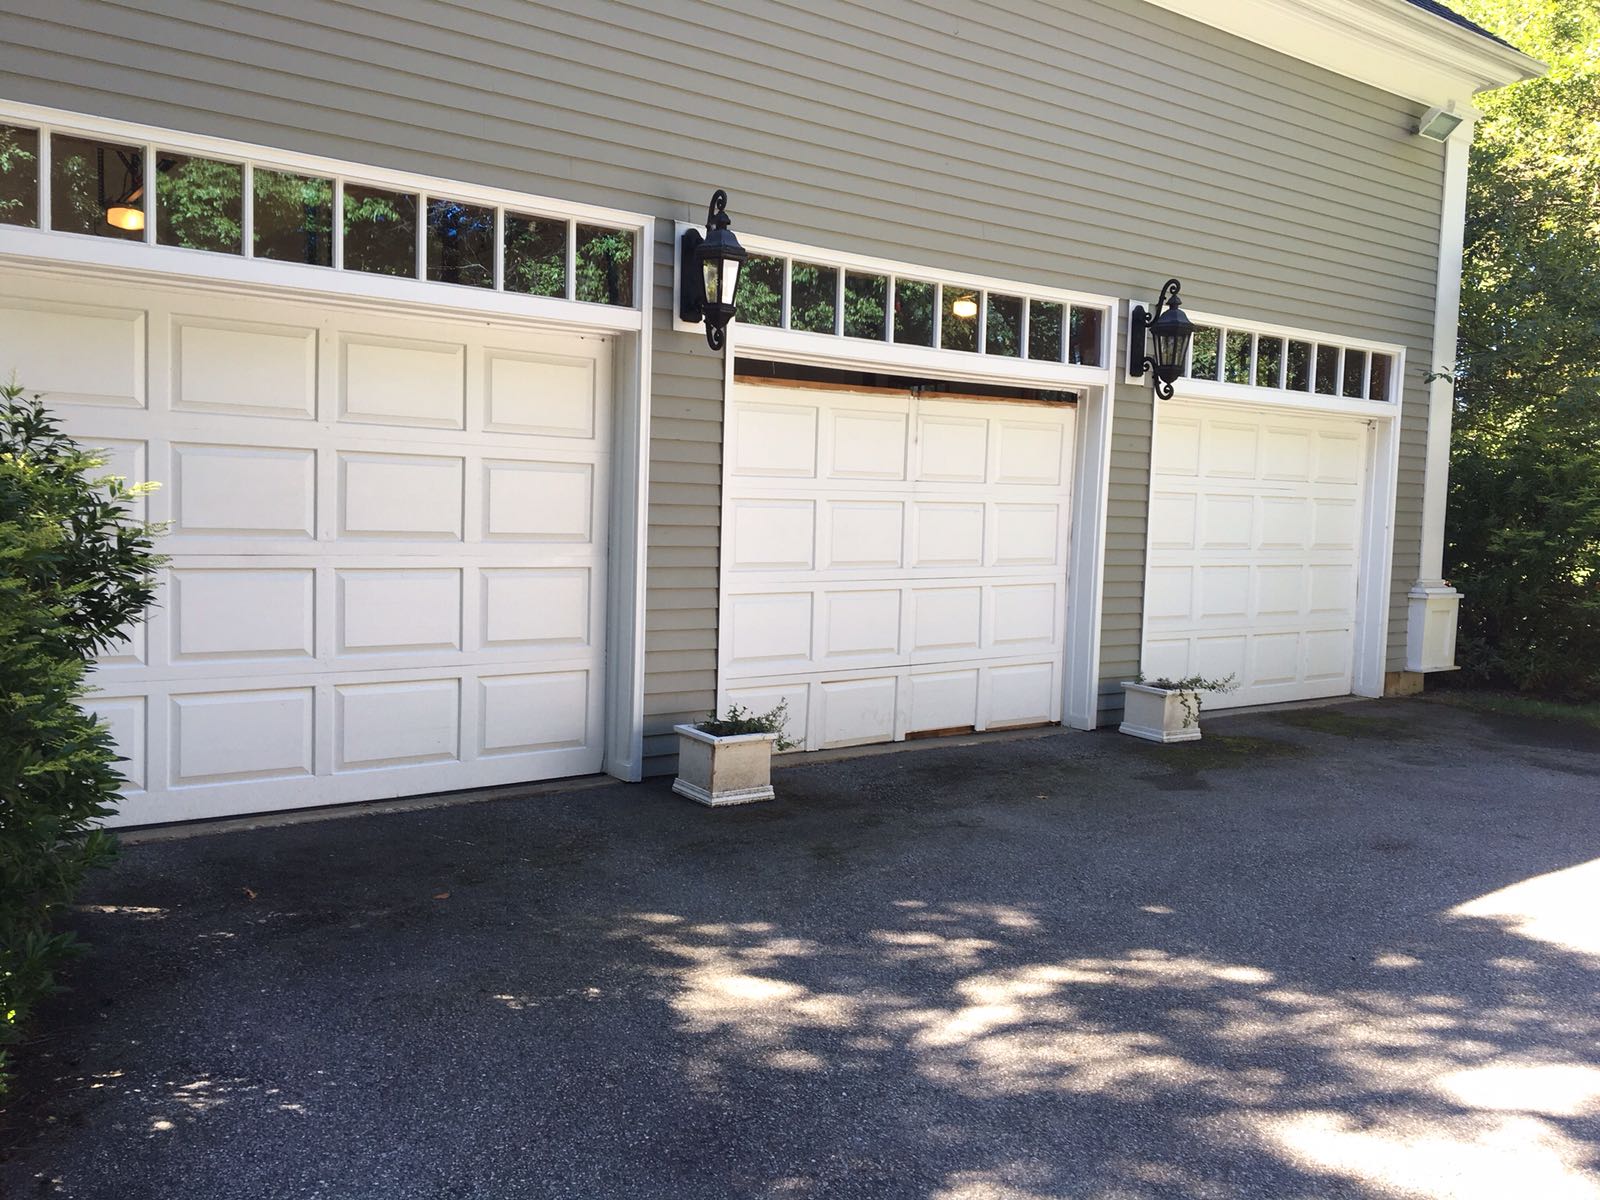 With garage doors repairs Leicester, you don’t need to spend a lot of money